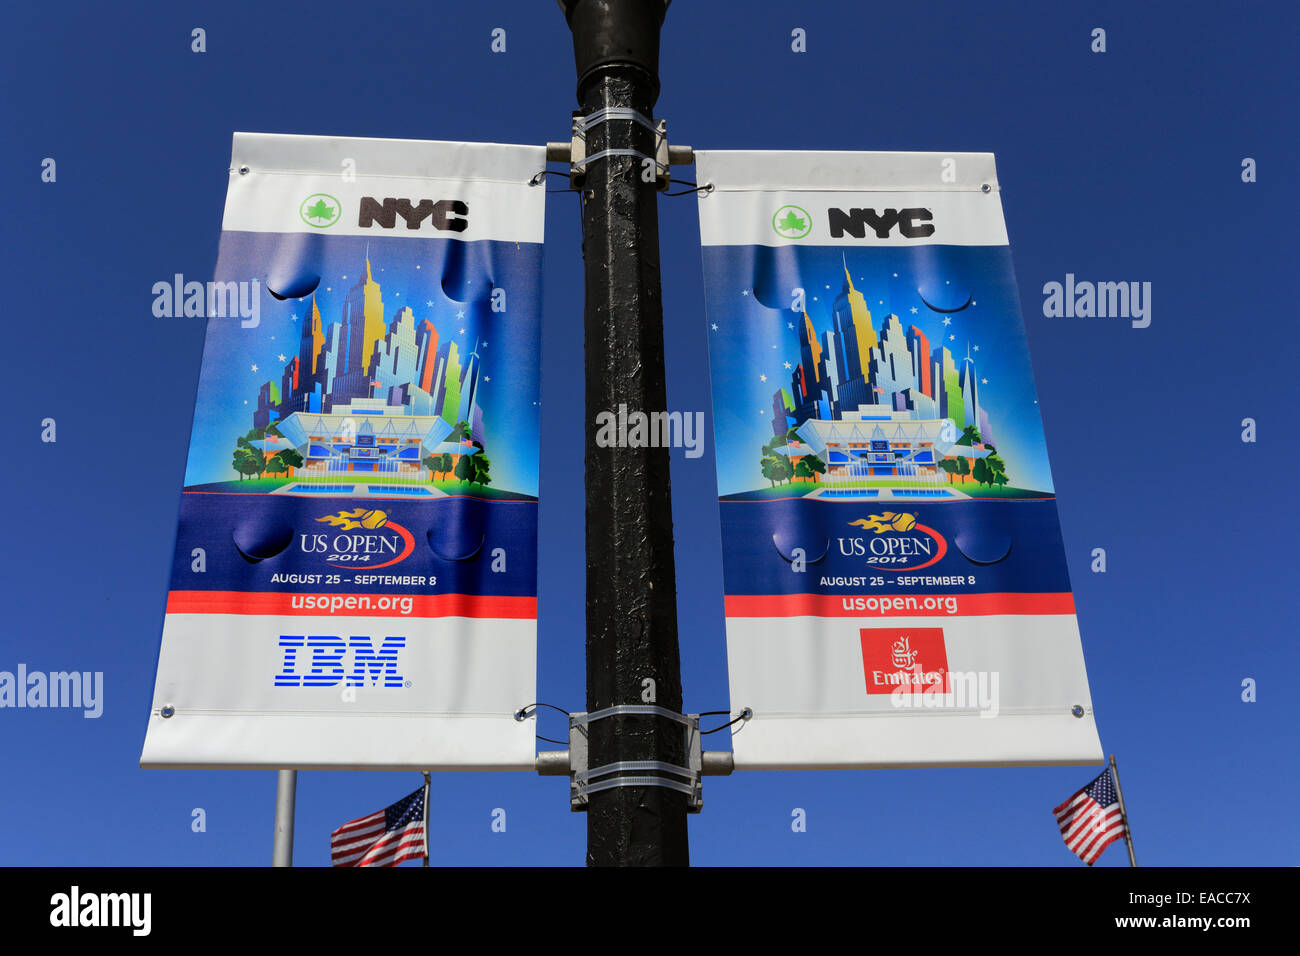 Banner a US Open Tennis Center Flushing Meadows Queens NY Foto Stock